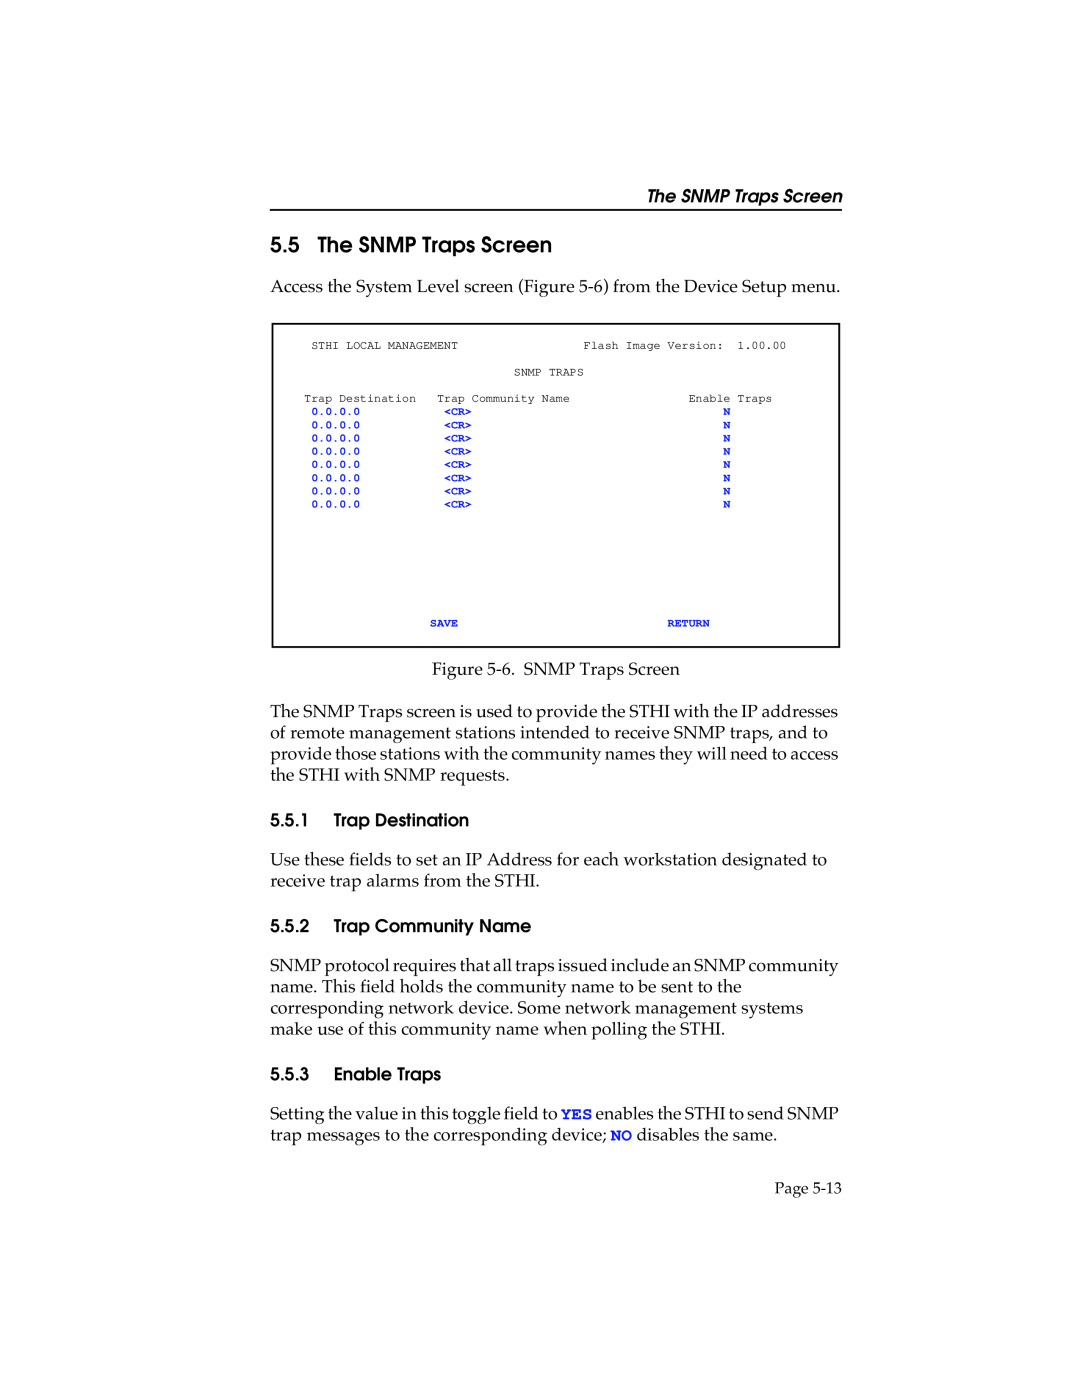 Cabletron Systems STHI manual The SNMP Traps Screen, 6. SNMP Traps Screen 